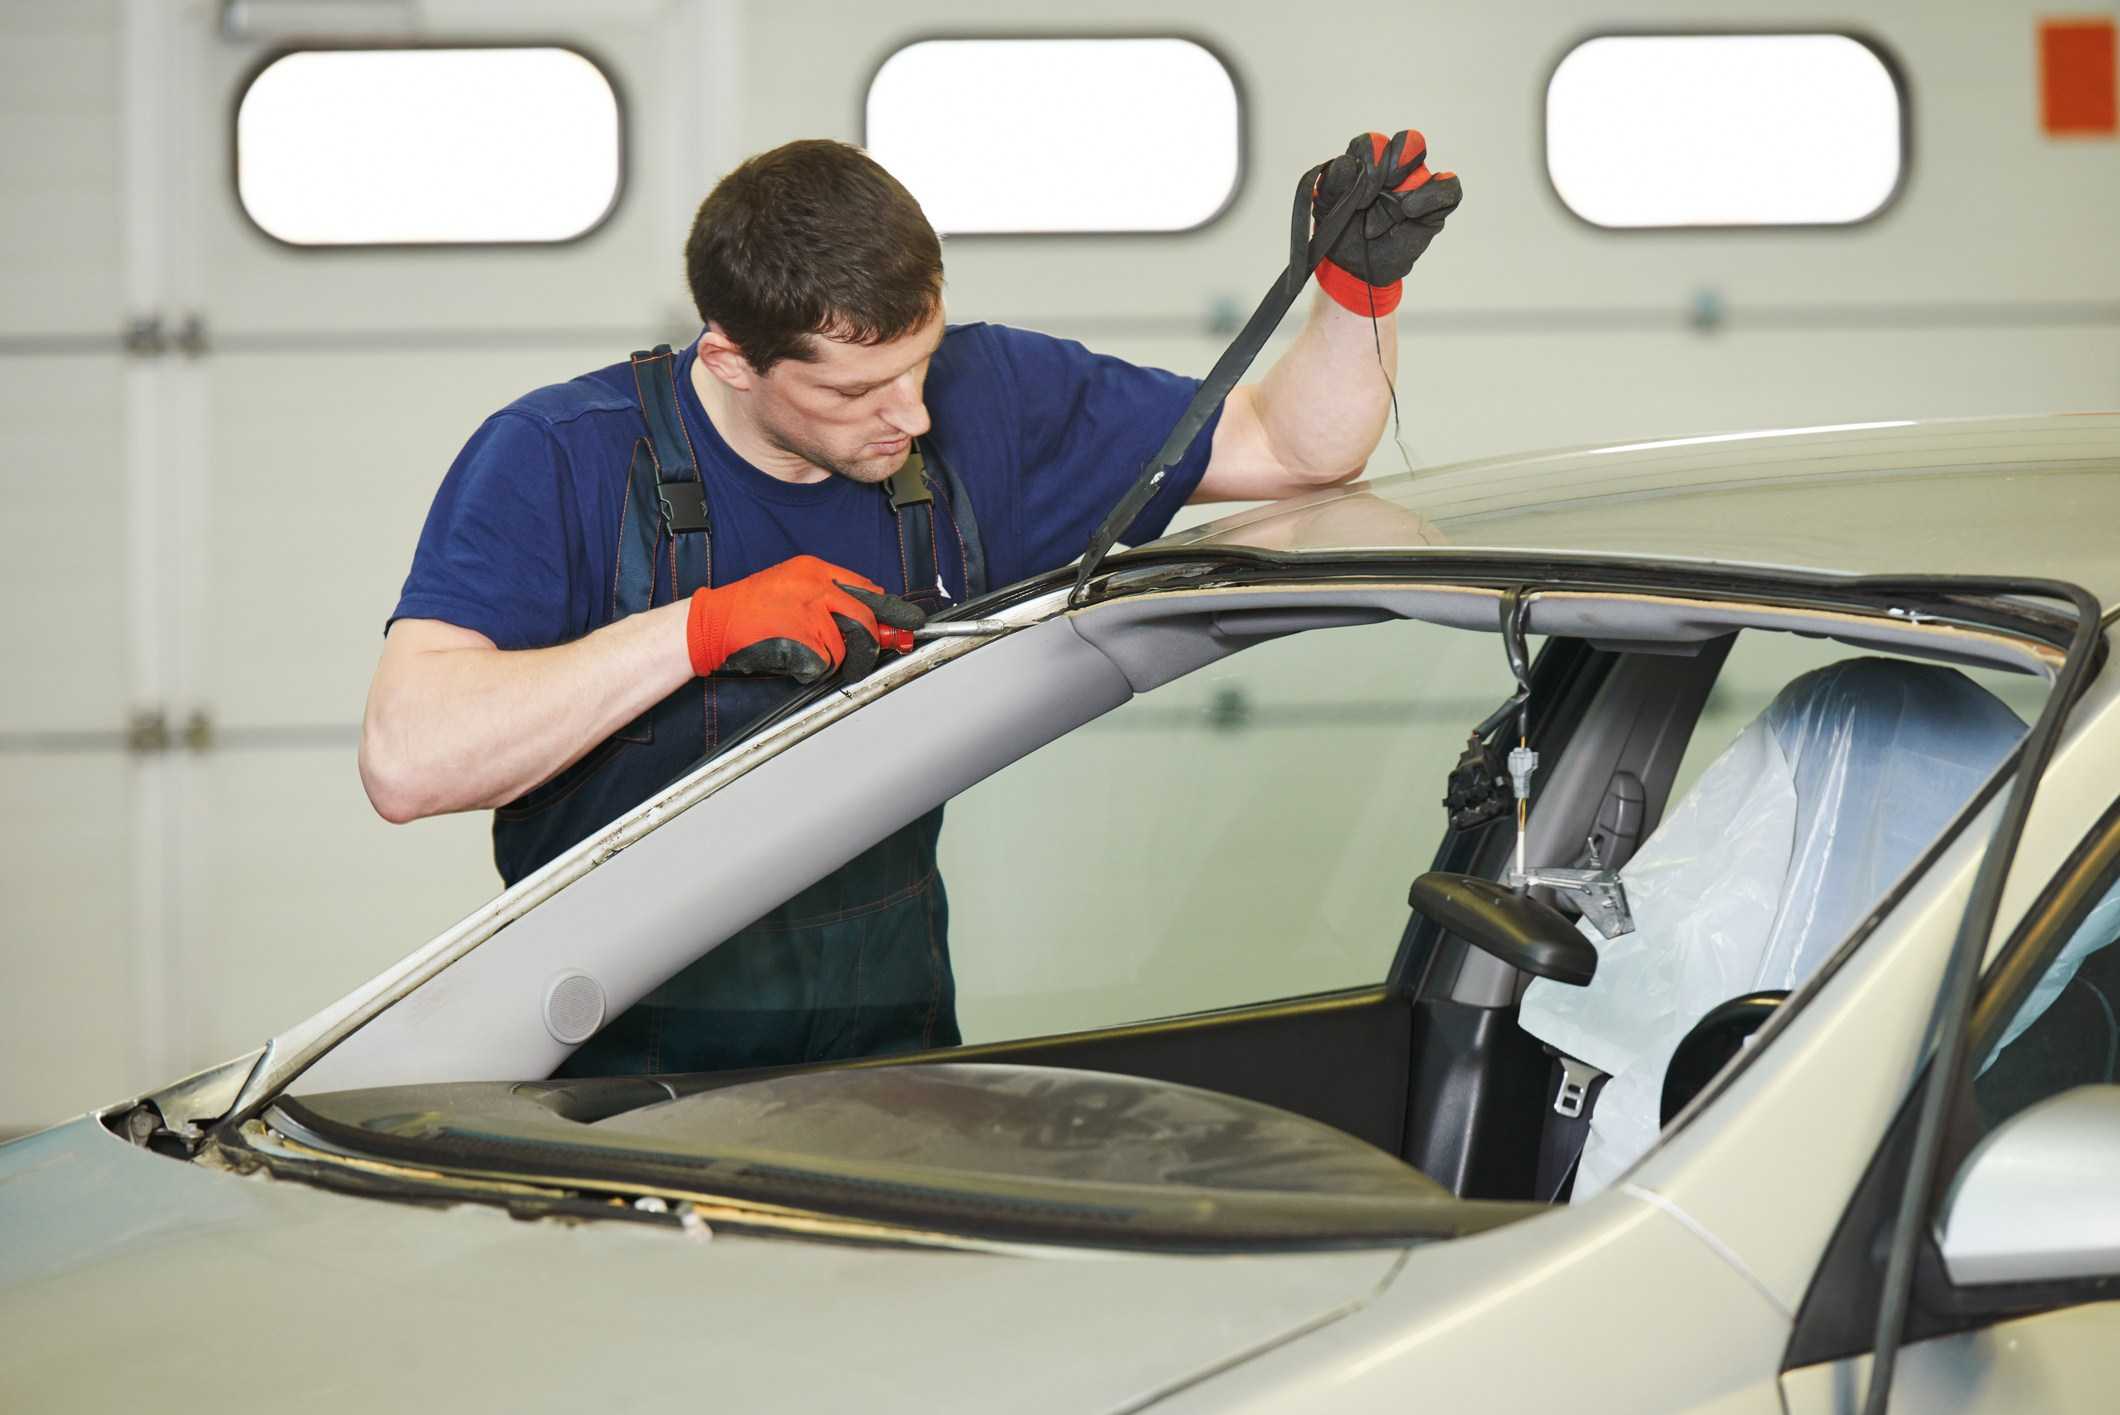 Windshield Replacement and Auto Repair DC | (202) 559-2404 Free Estimate For Windshield